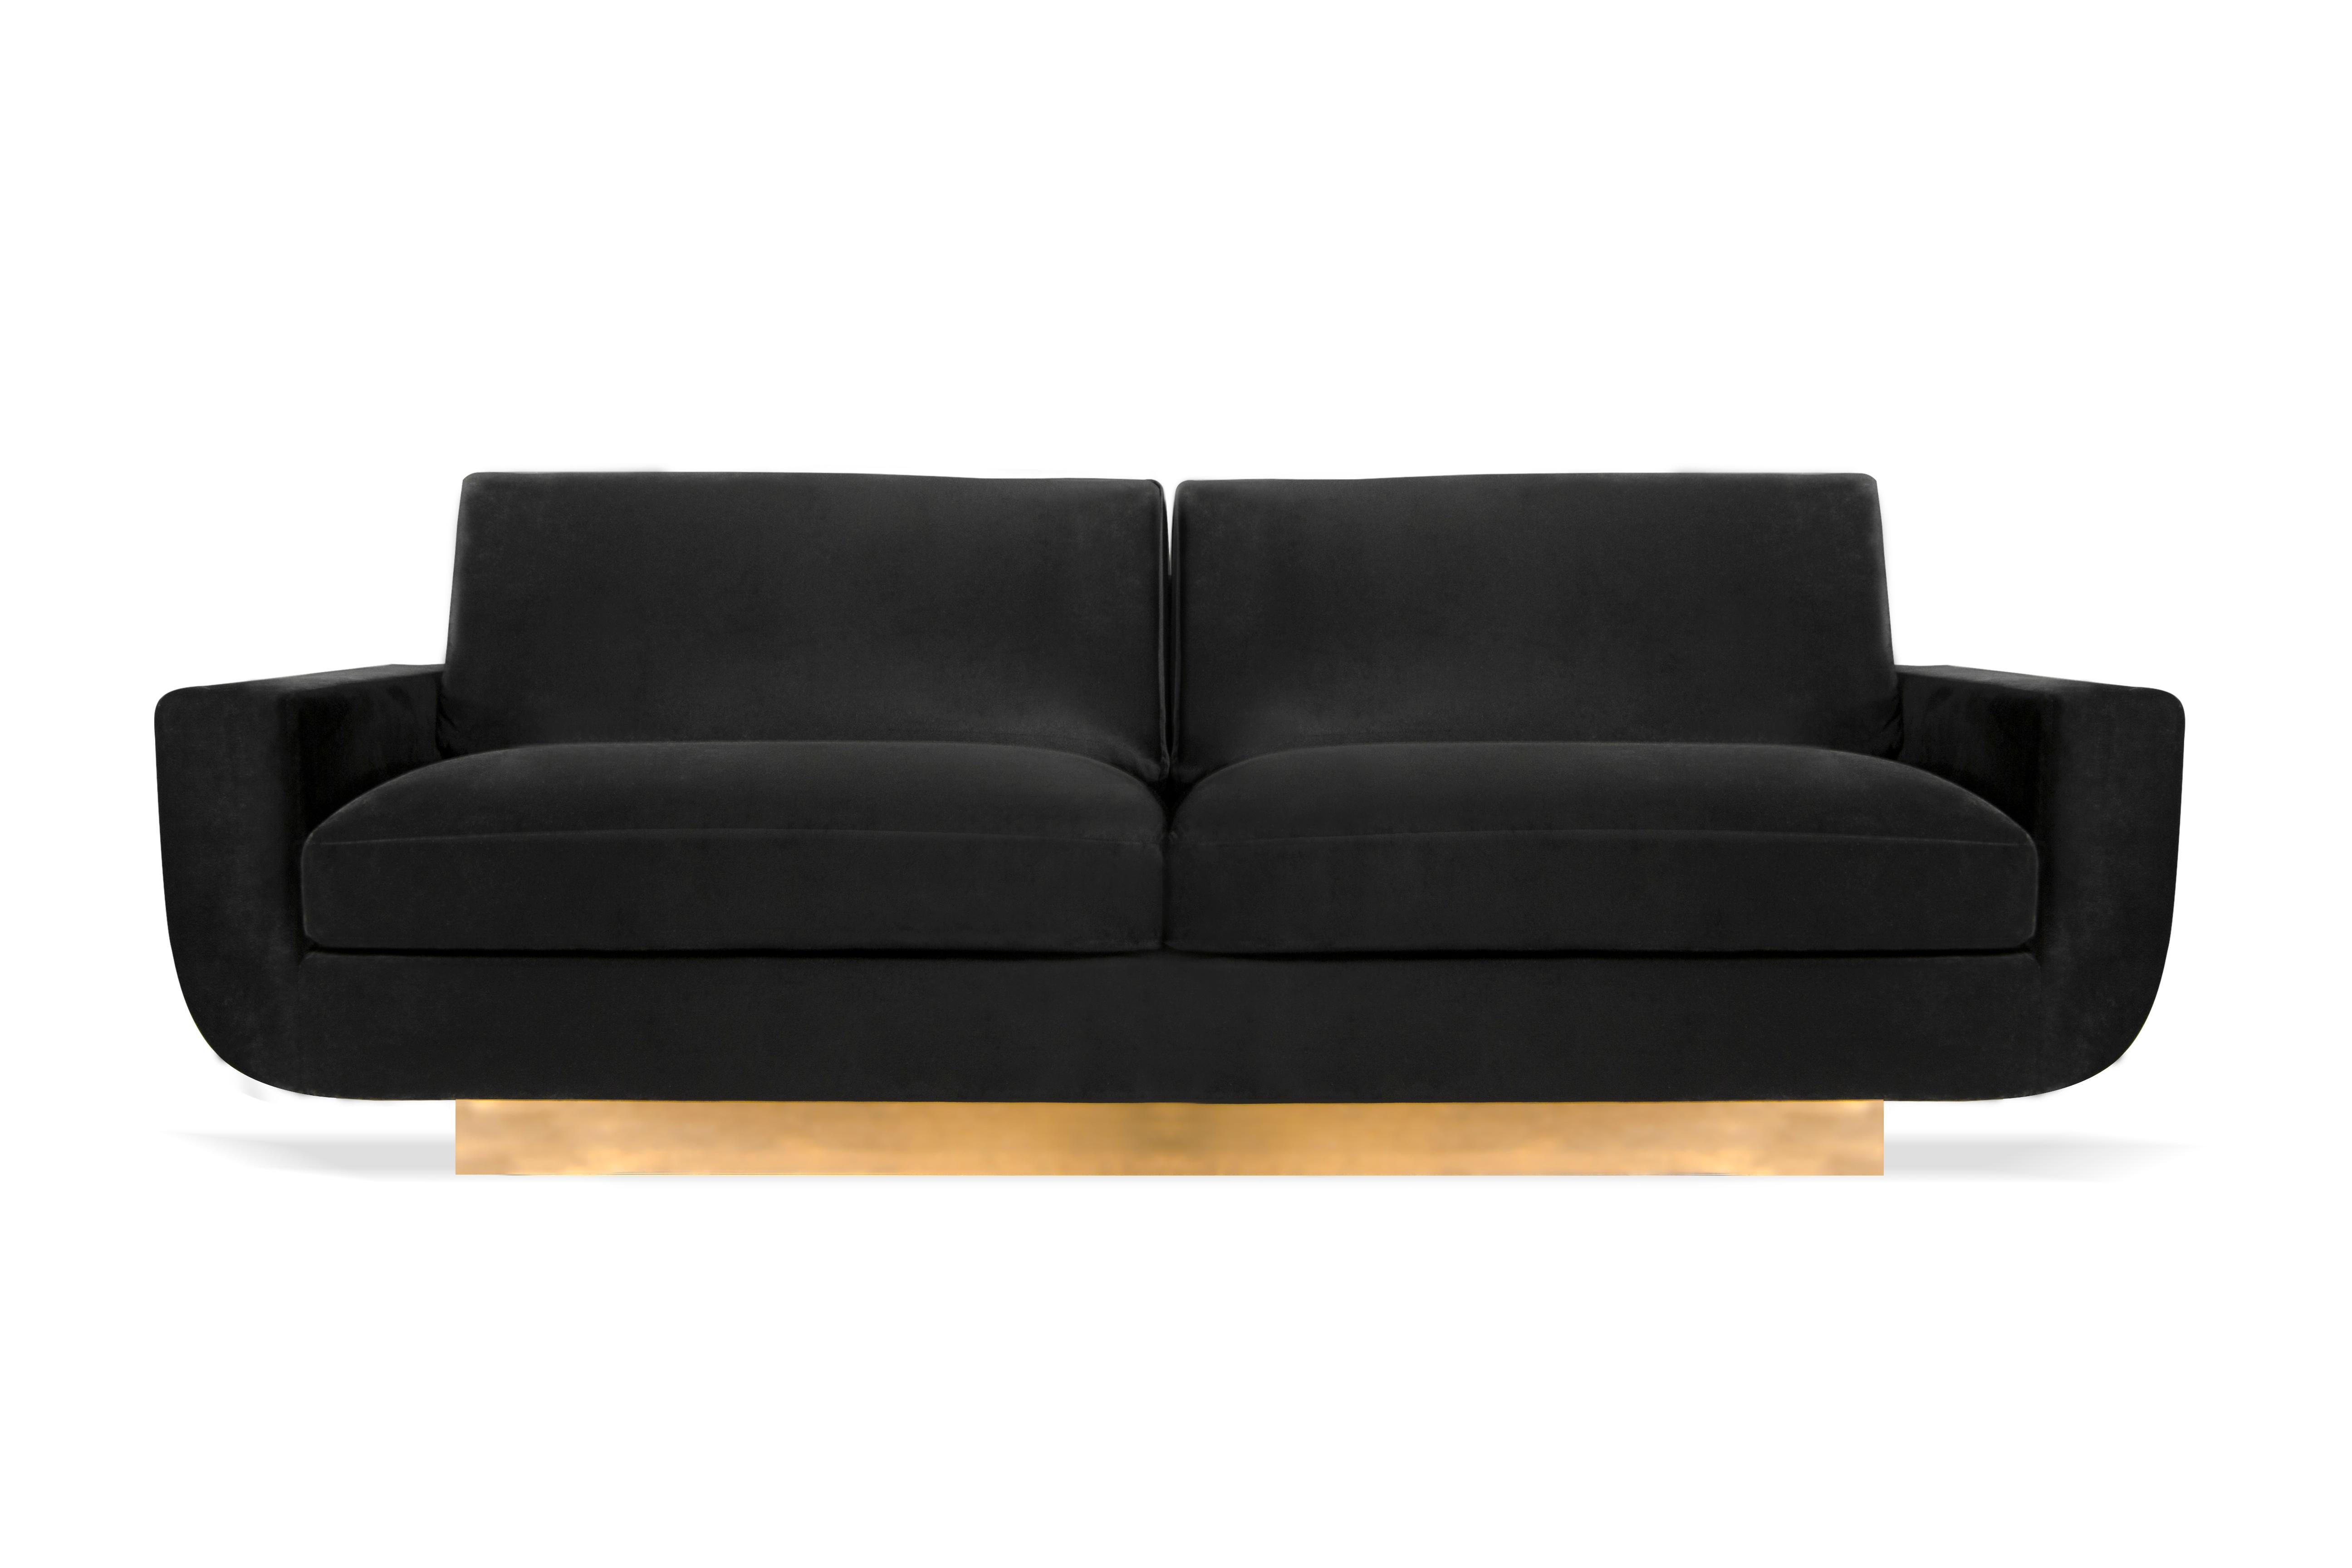 Mid-Century Modern design has never looked so posh as the Sofia sofa. Her two-seat, vintage shape is modernly revamped by Koket with her plush curves being cupped by a lustrous, linear metal base.

Options
Upholstery: Available in any fabric from